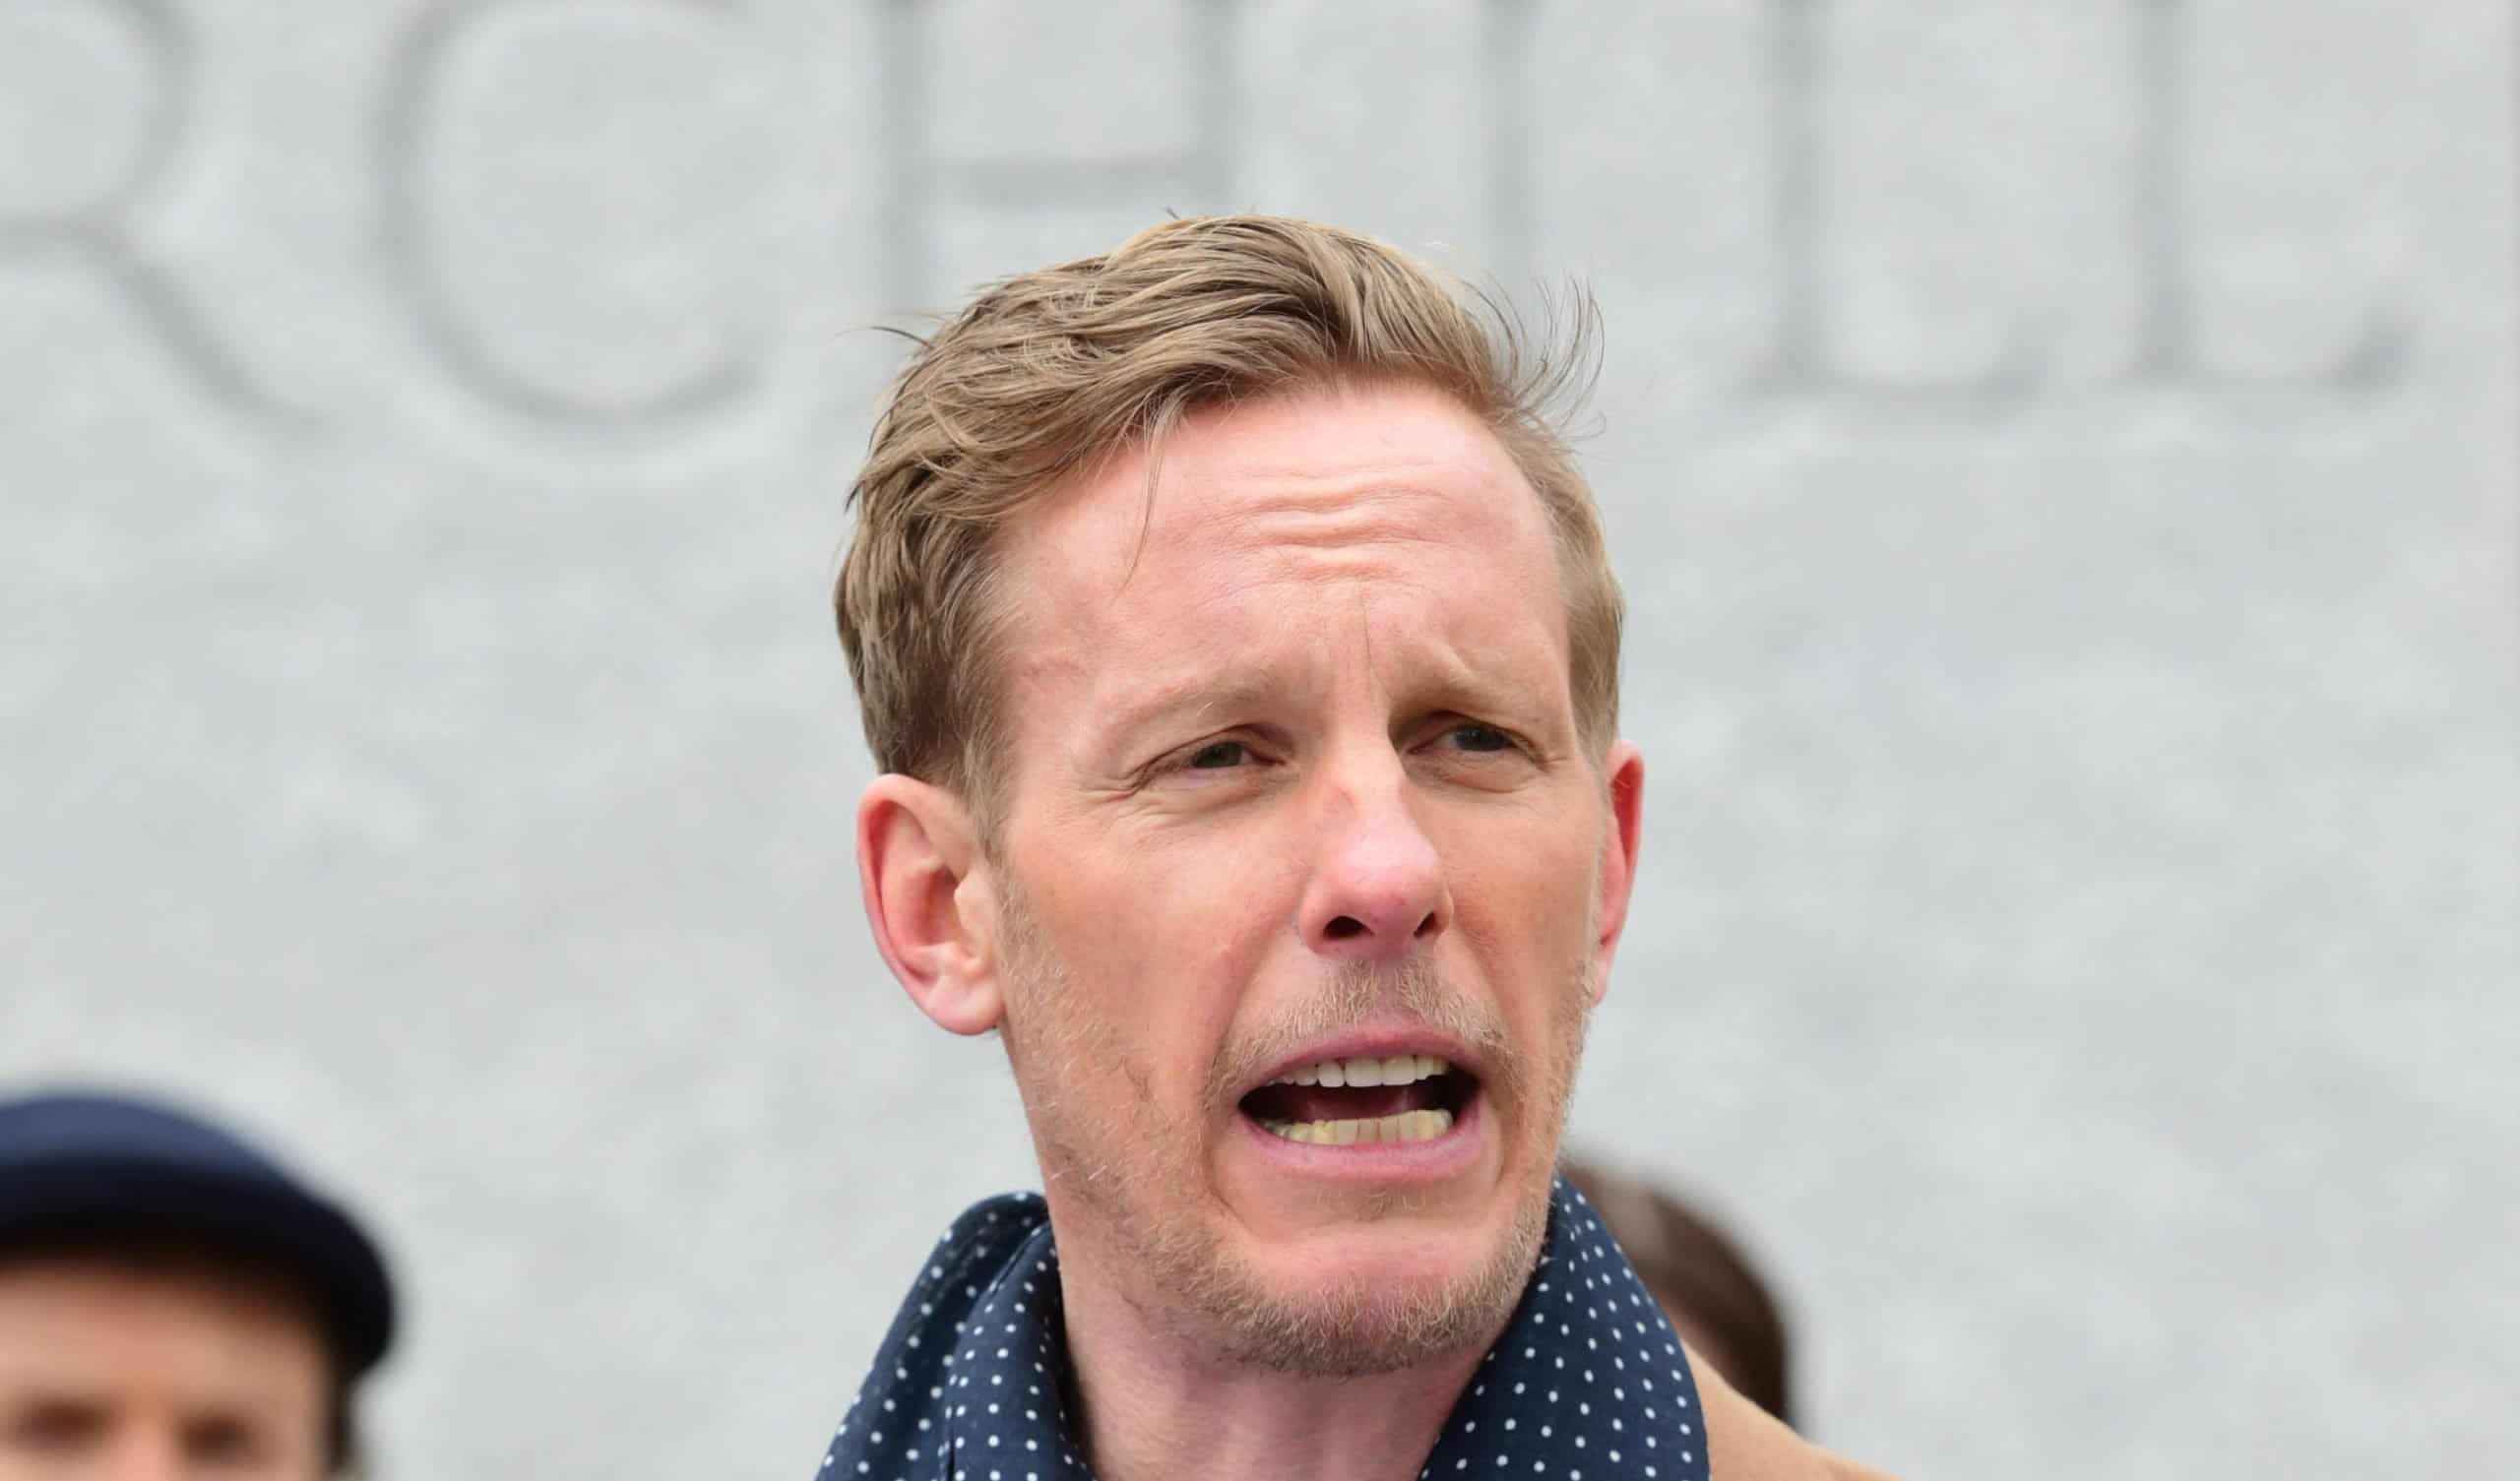 How to complain to Ofcom about vile Laurence Fox remarks